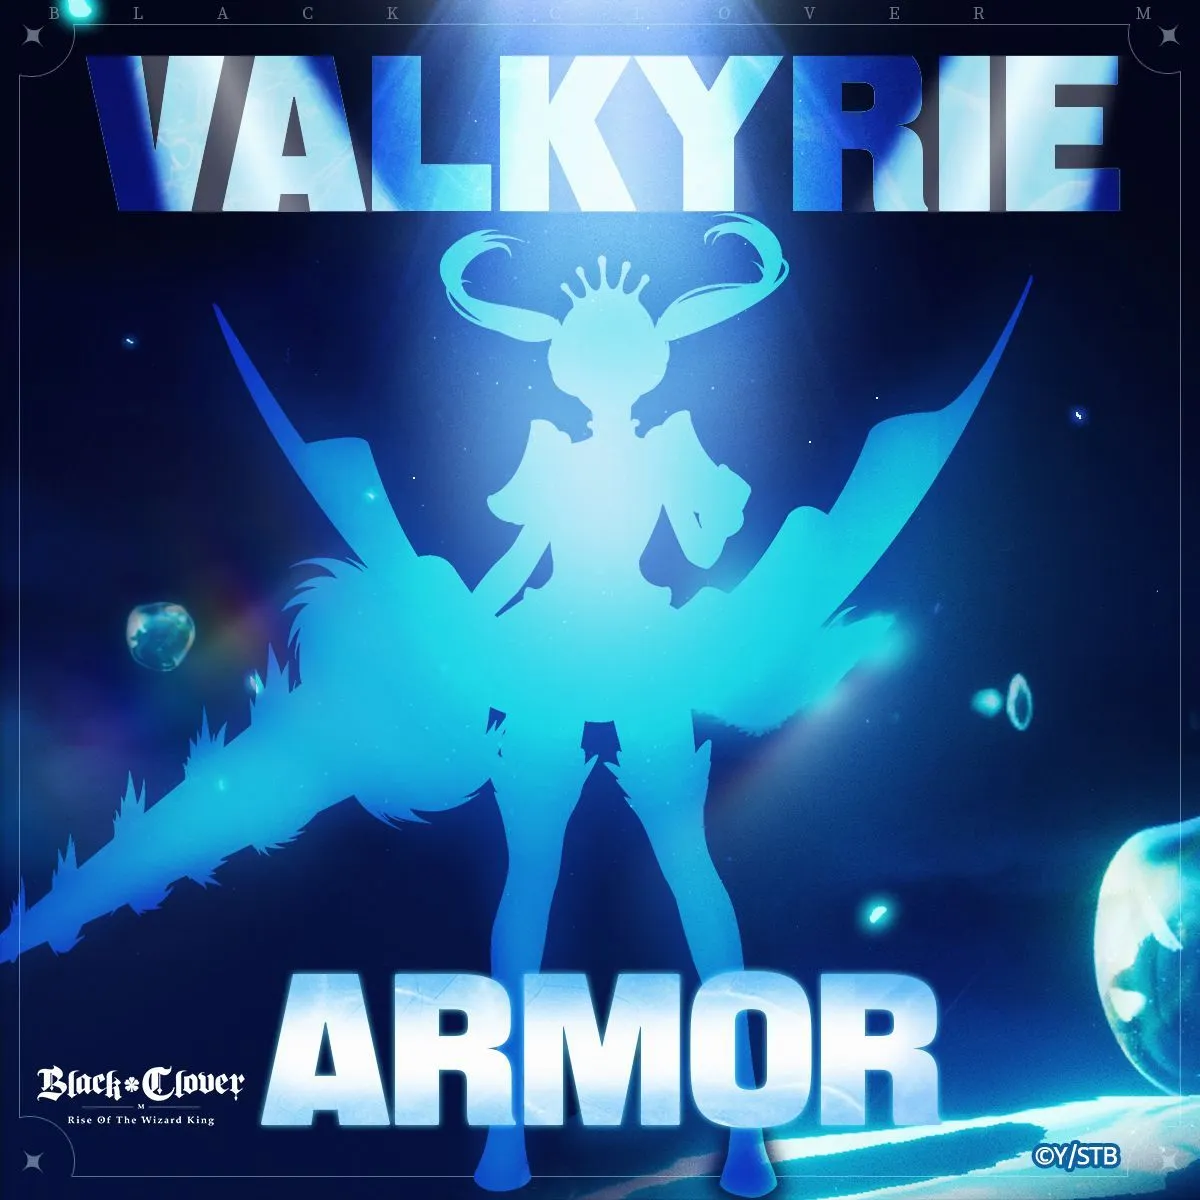 Black Clover M: Upcoming Character: Valkyrie Armor Noelle - Pre-Release Review and Skills